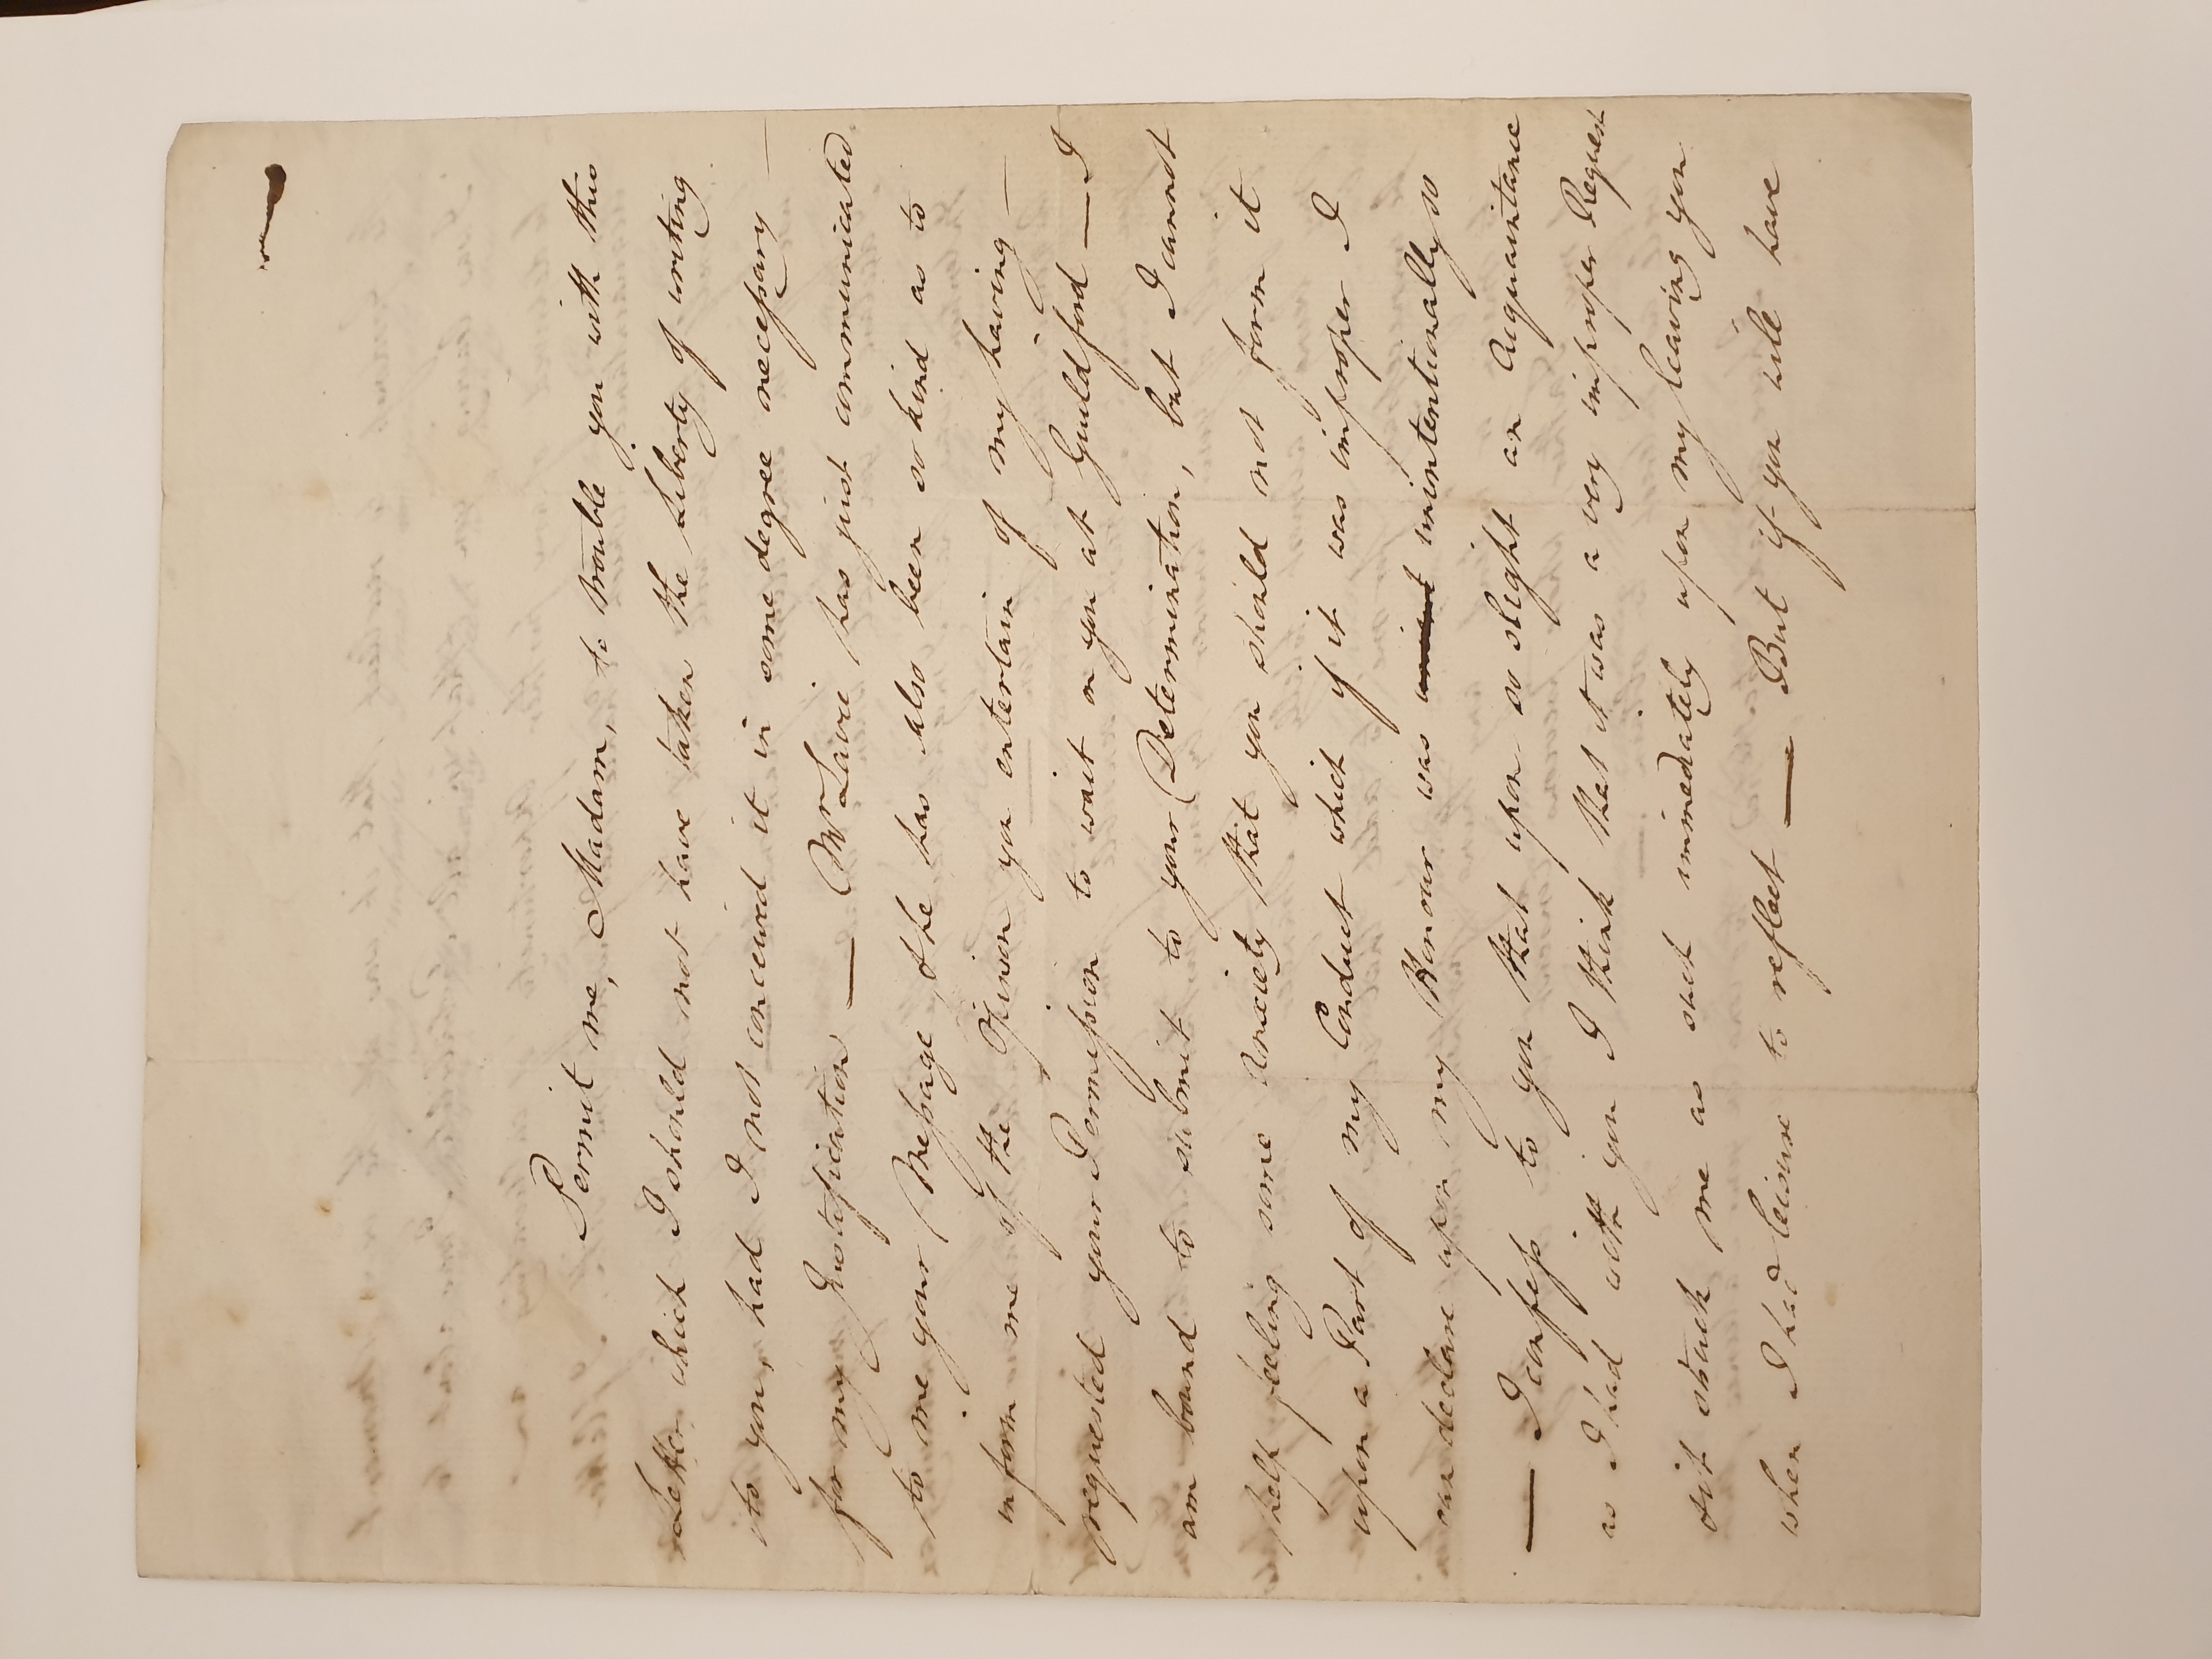 Image #1 of letter: William Grey to Ann Heatley, 31 October 1787